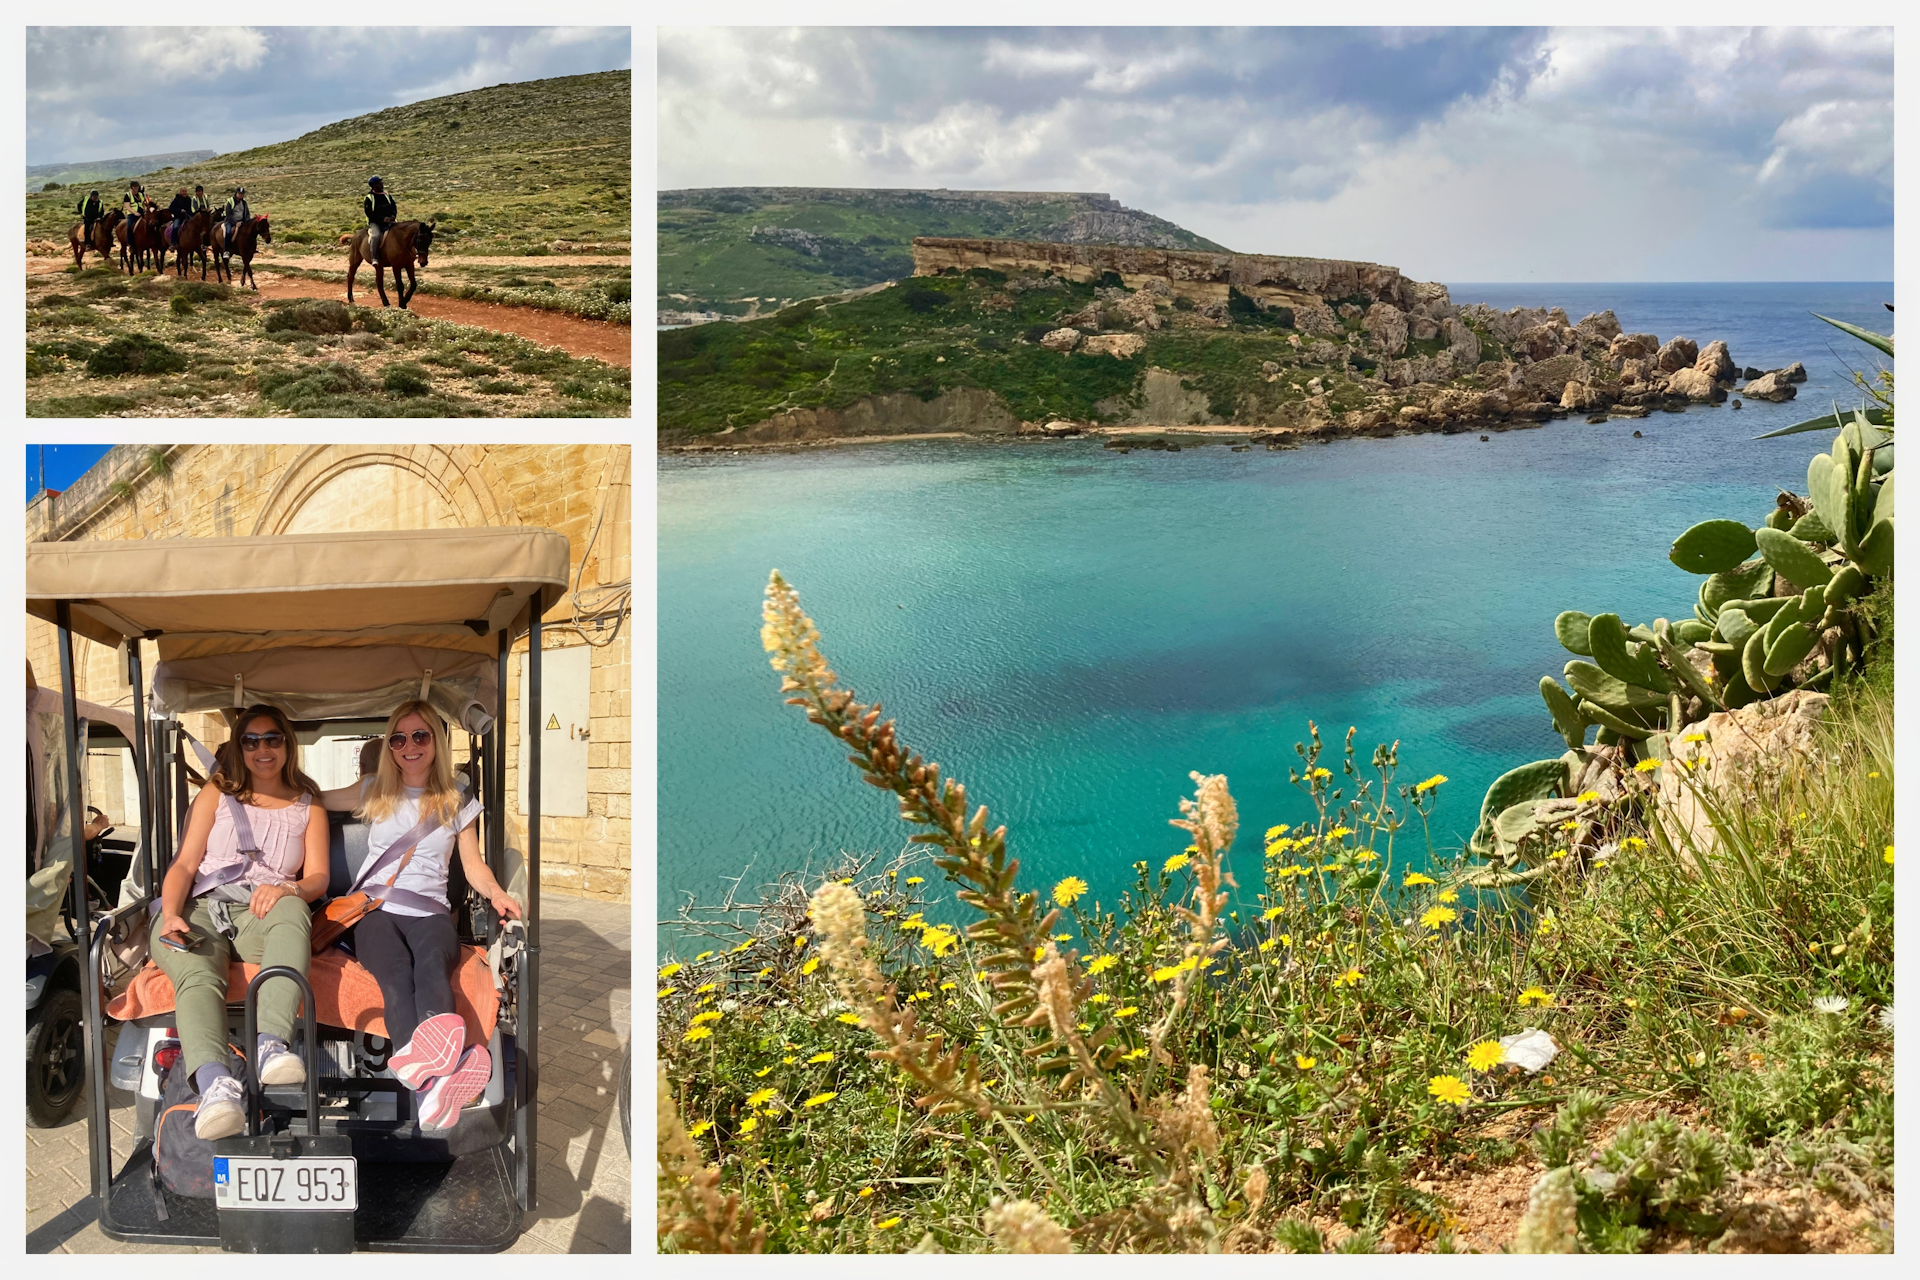 A segway and horse-riding tour in Golden Bay, Malta